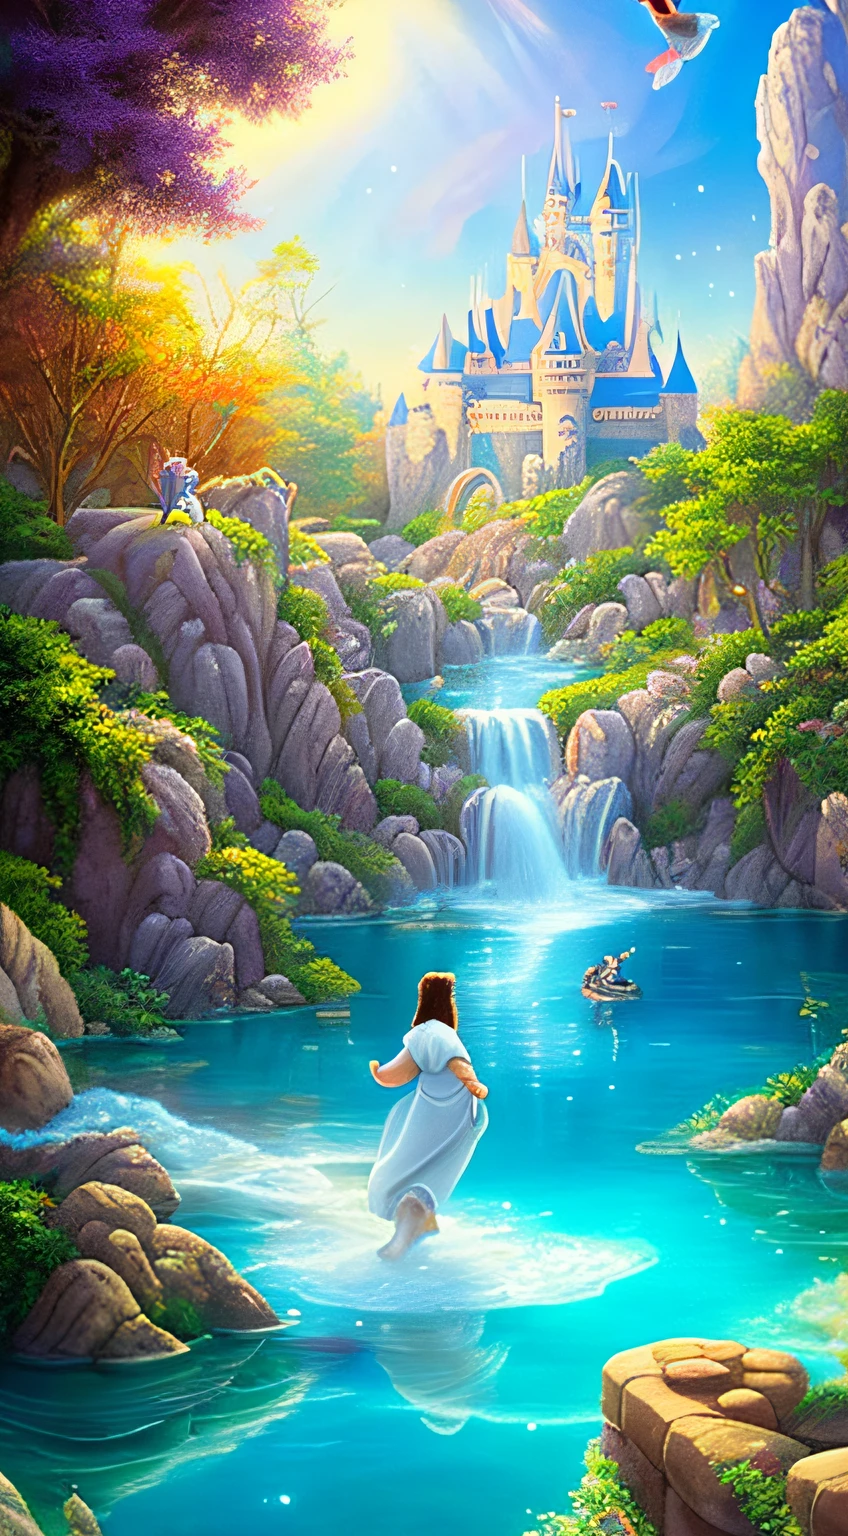 Imagine Jesus Christ as a Disney character walking on water. Capture the whimsical and magical essence of a Disney character while staying true to the biblical narrative. Depict Jesus walking on the water with a sense of wonder and amazement. Consider the surrounding environment, the expressions on His face, and the details of this extraordinary moment as you create your artwork or scene."